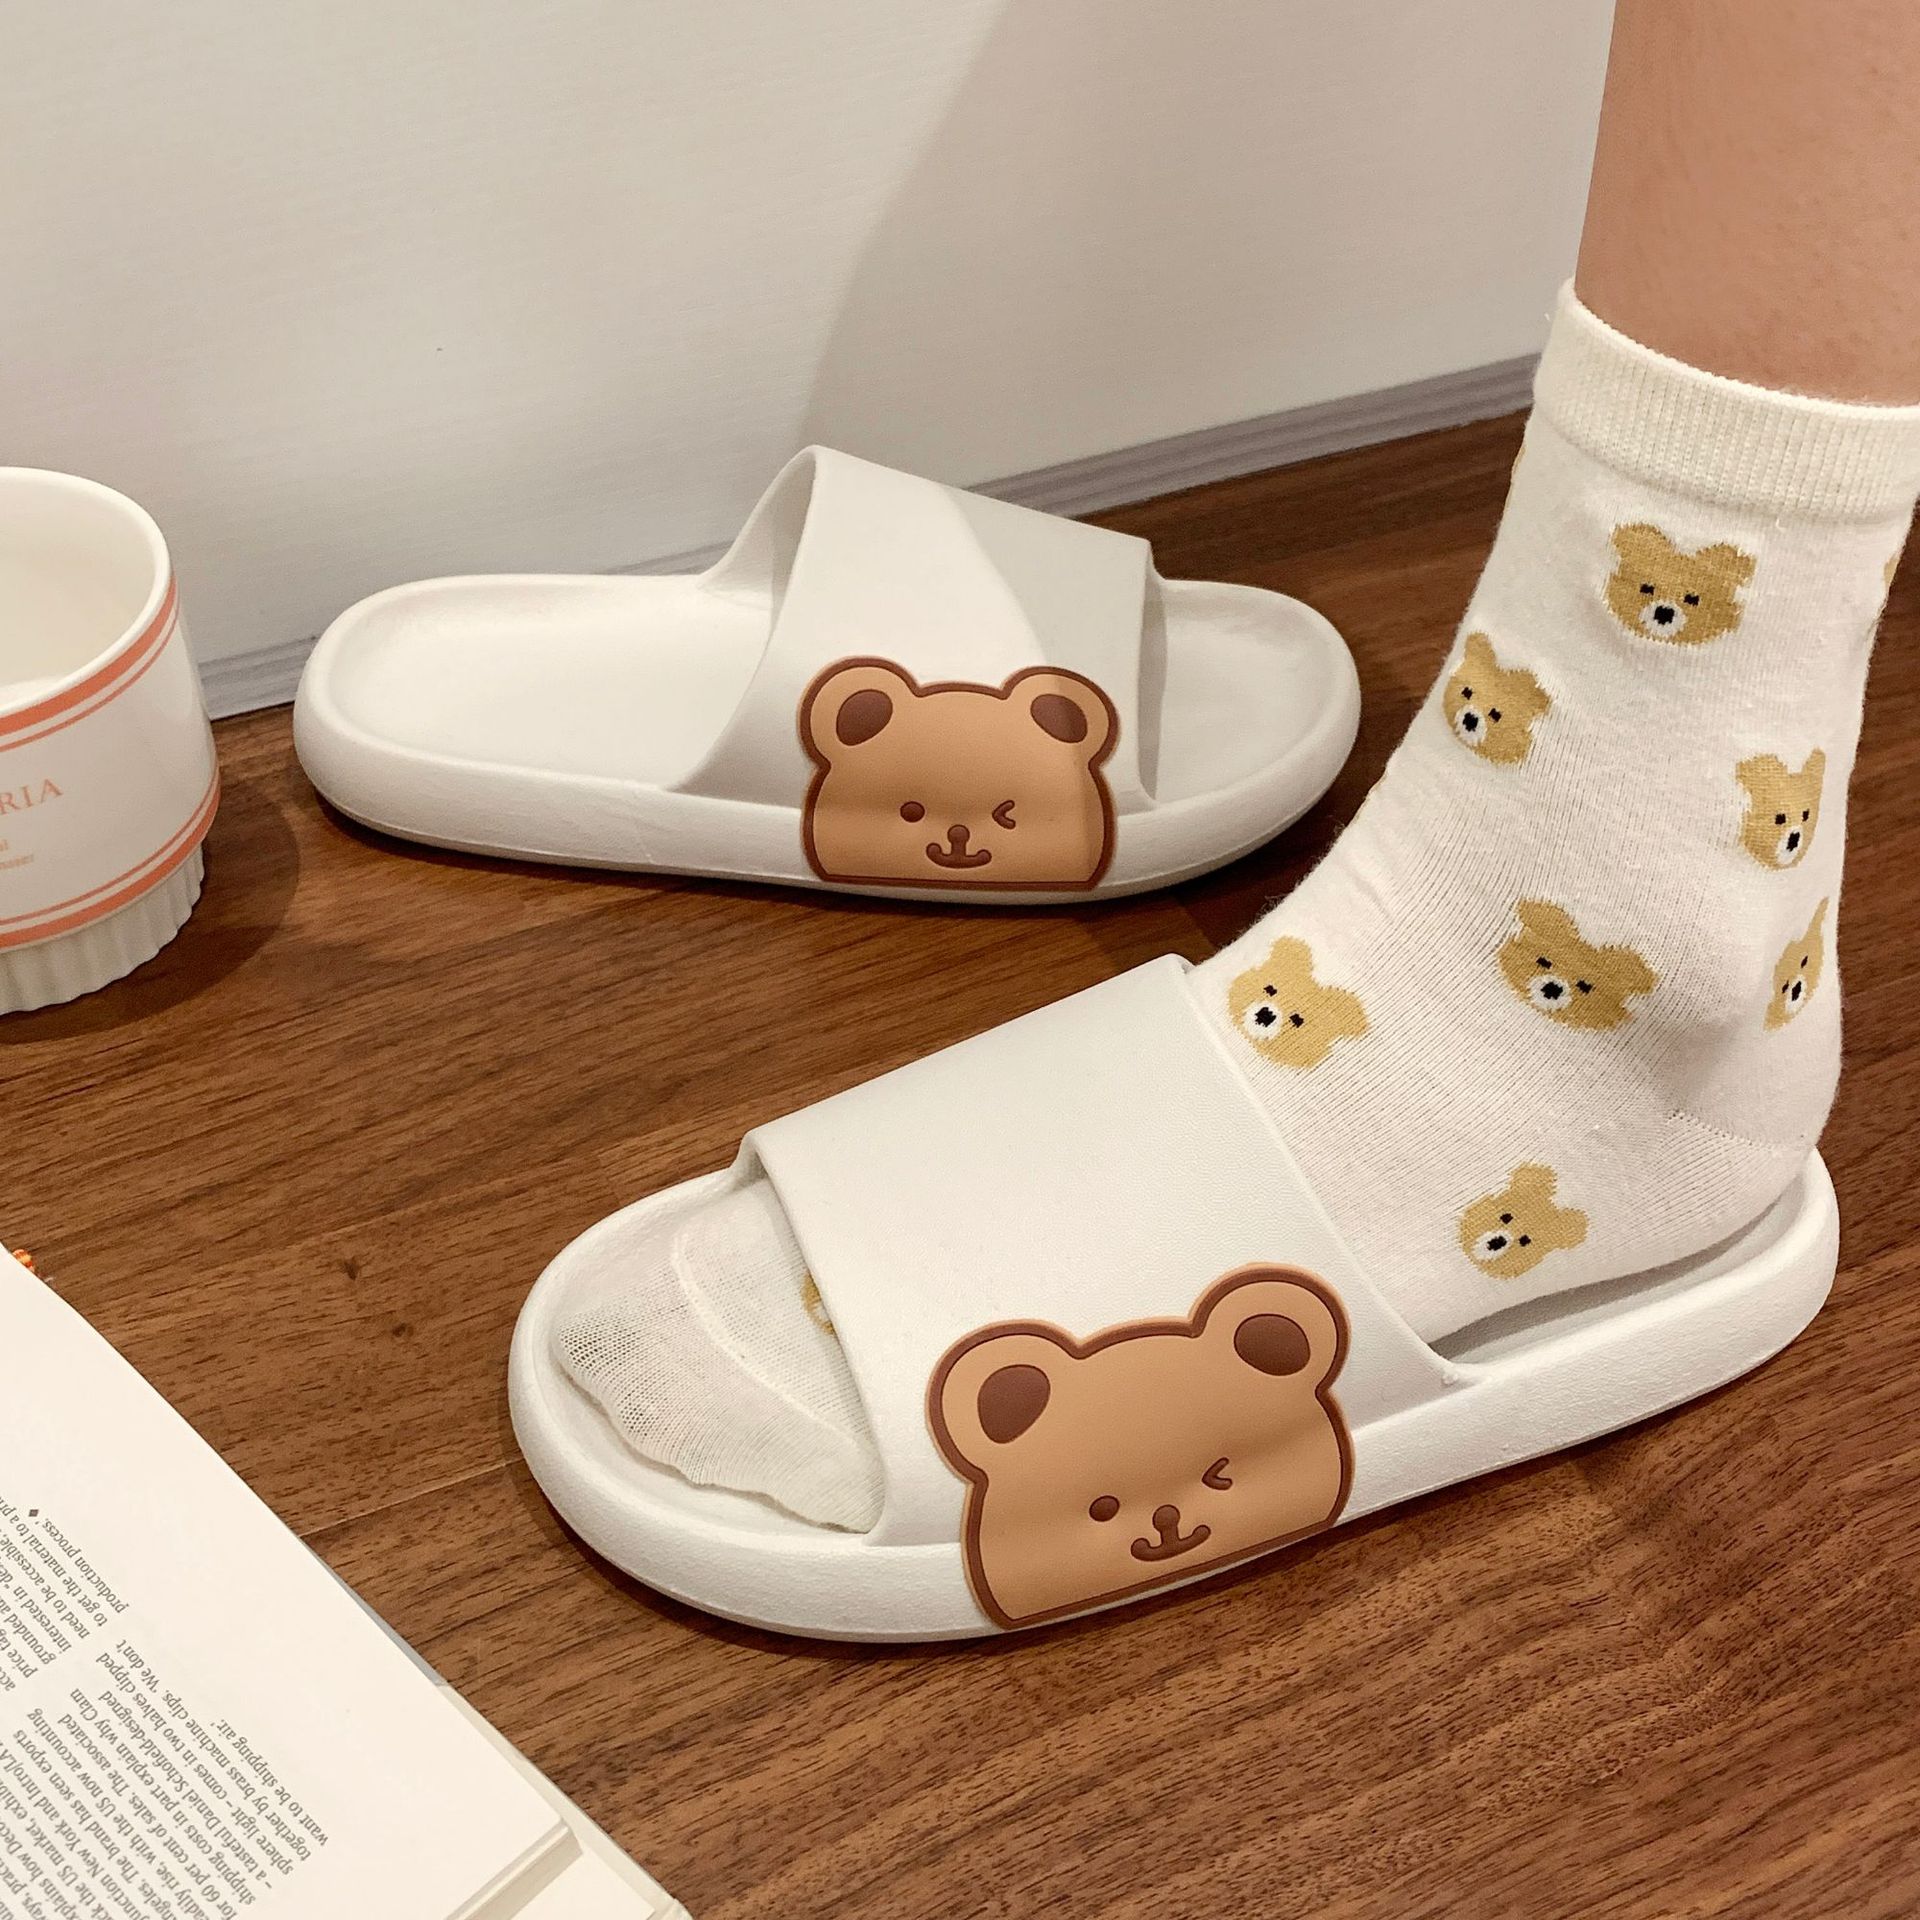 Poop Feeling Home Slippers Home Female Summer Outwear Home Soft Platform Student Couple Casual Sandals Female